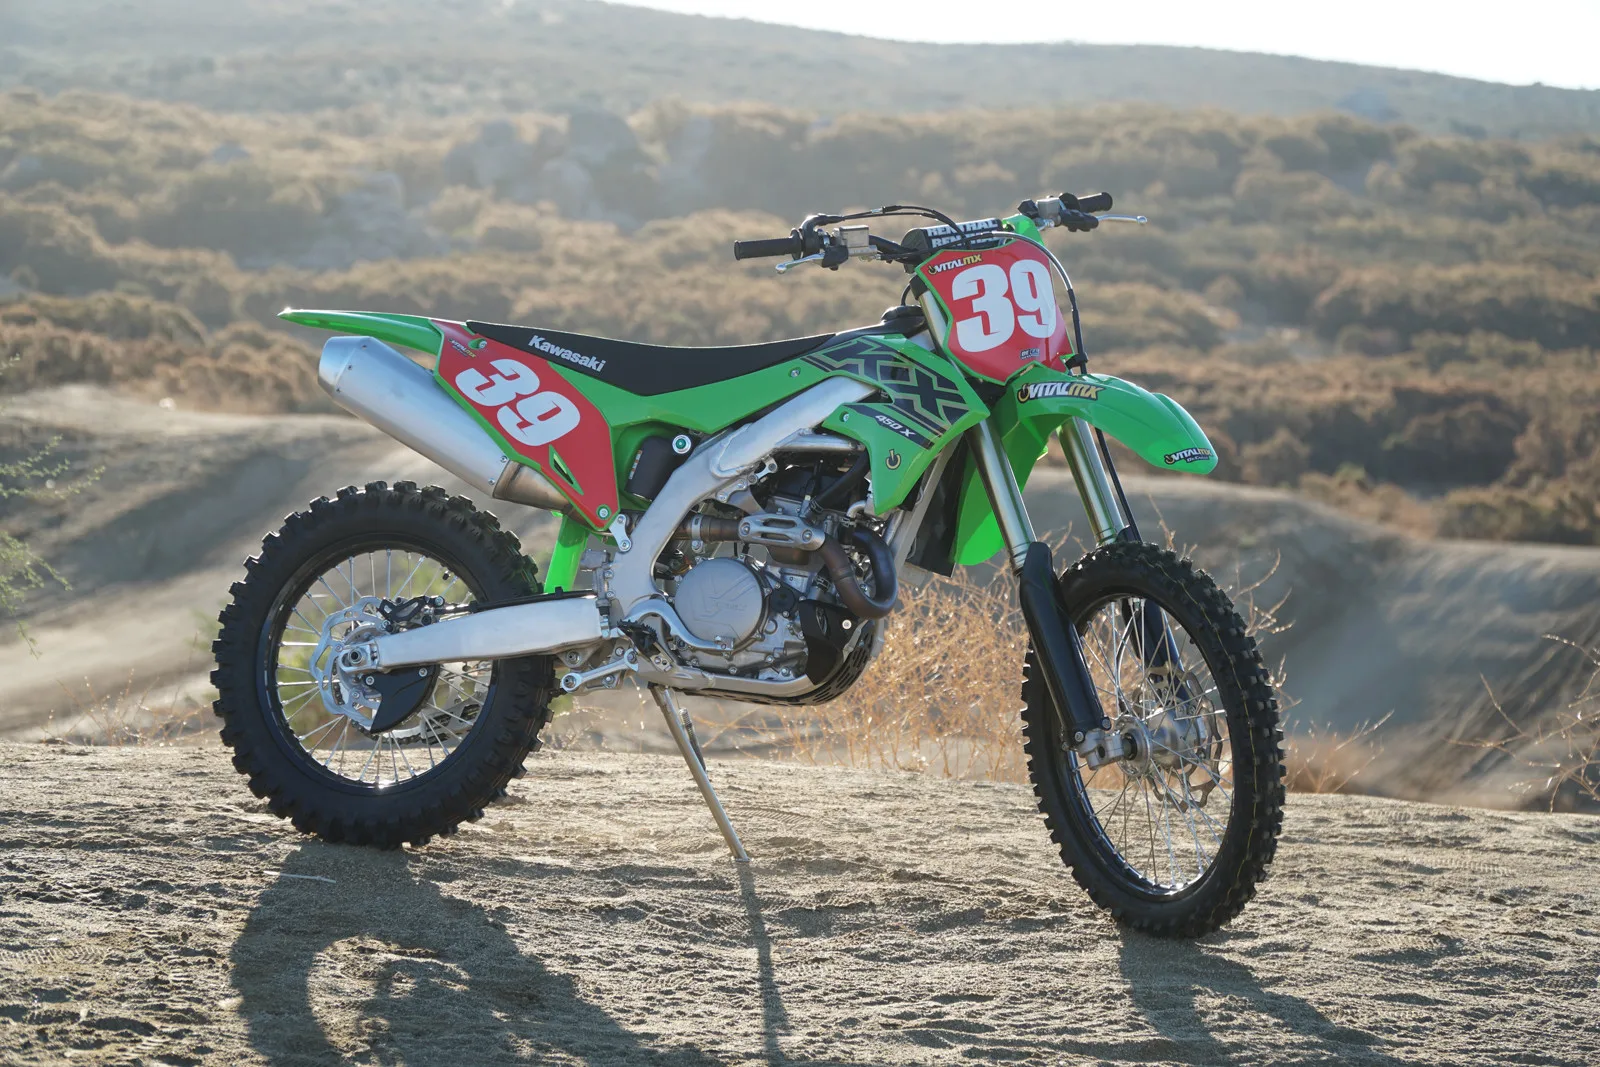 

SUMMER SALES DISCOUNT ON AUTHENTIC 2020/2021 Kawasakis KLX 110R L